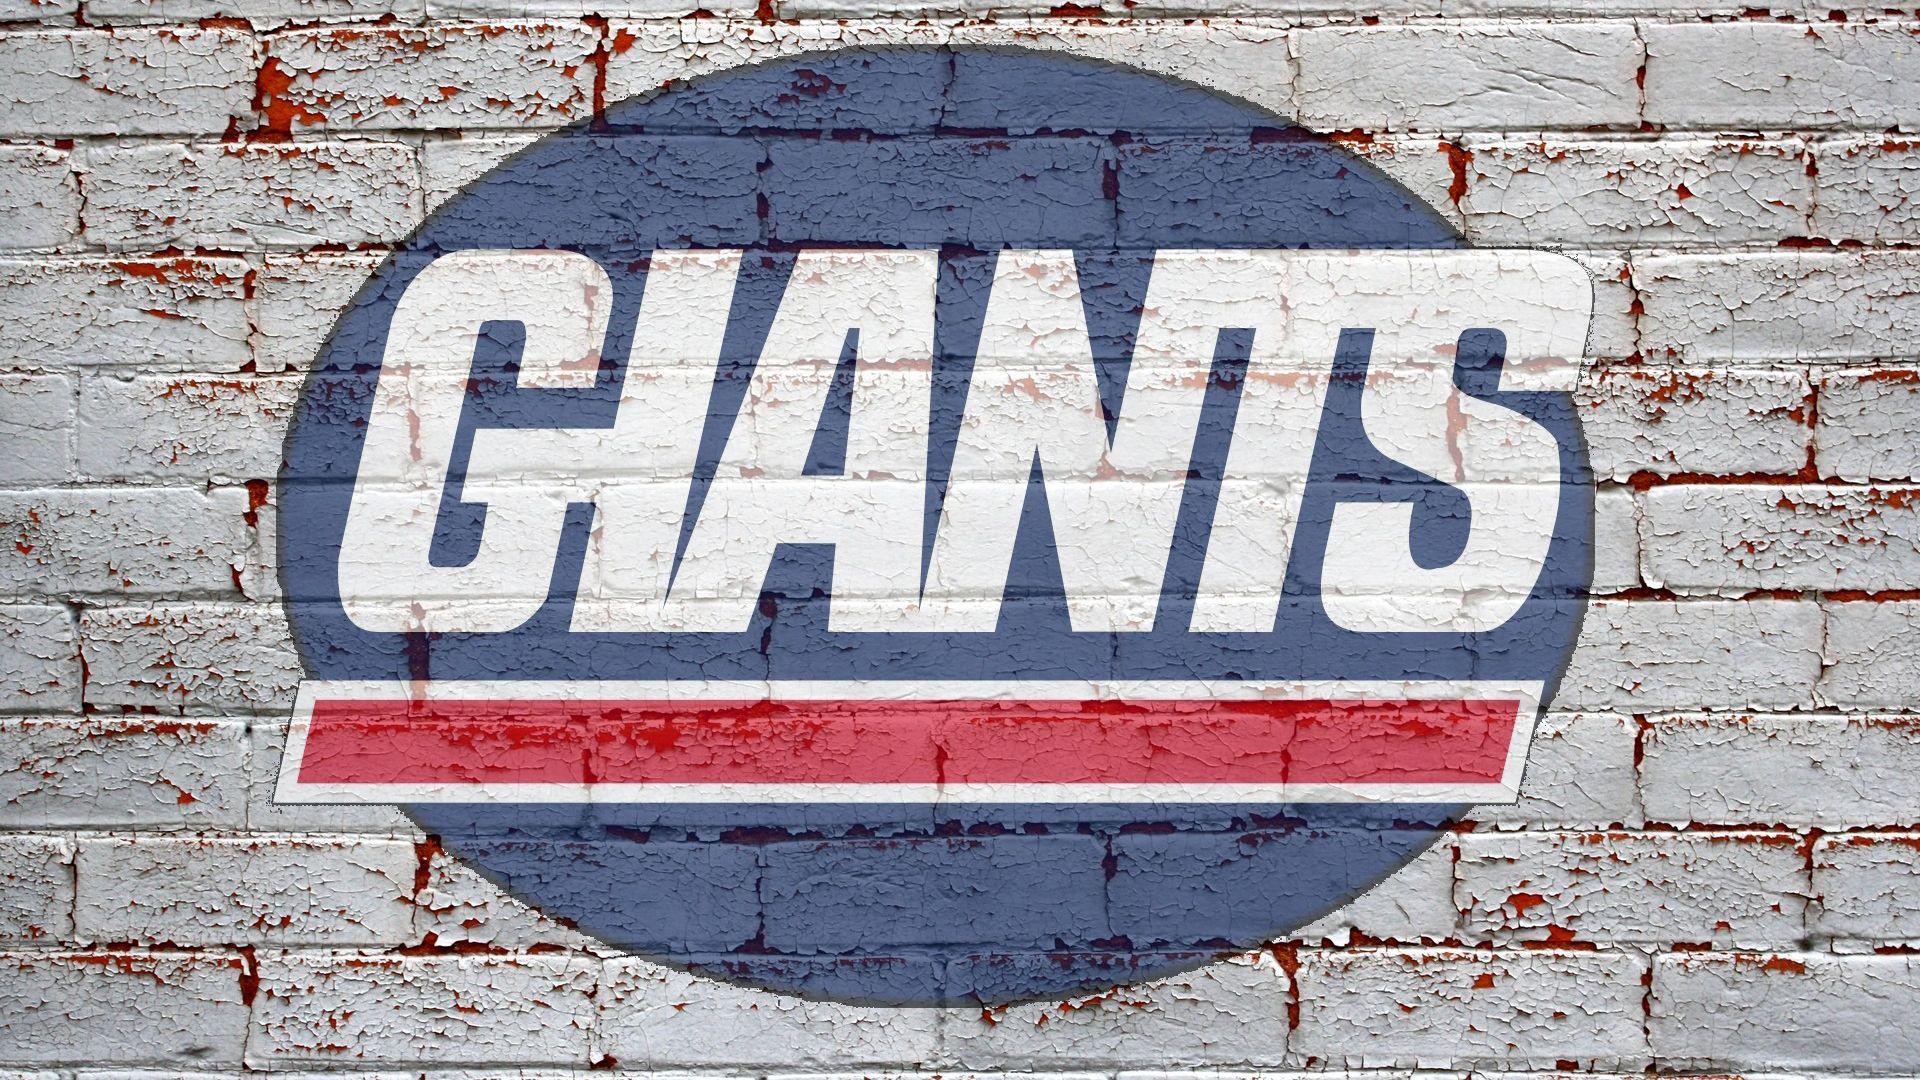 New York Giants Wallpaper Image Photo Picture Background